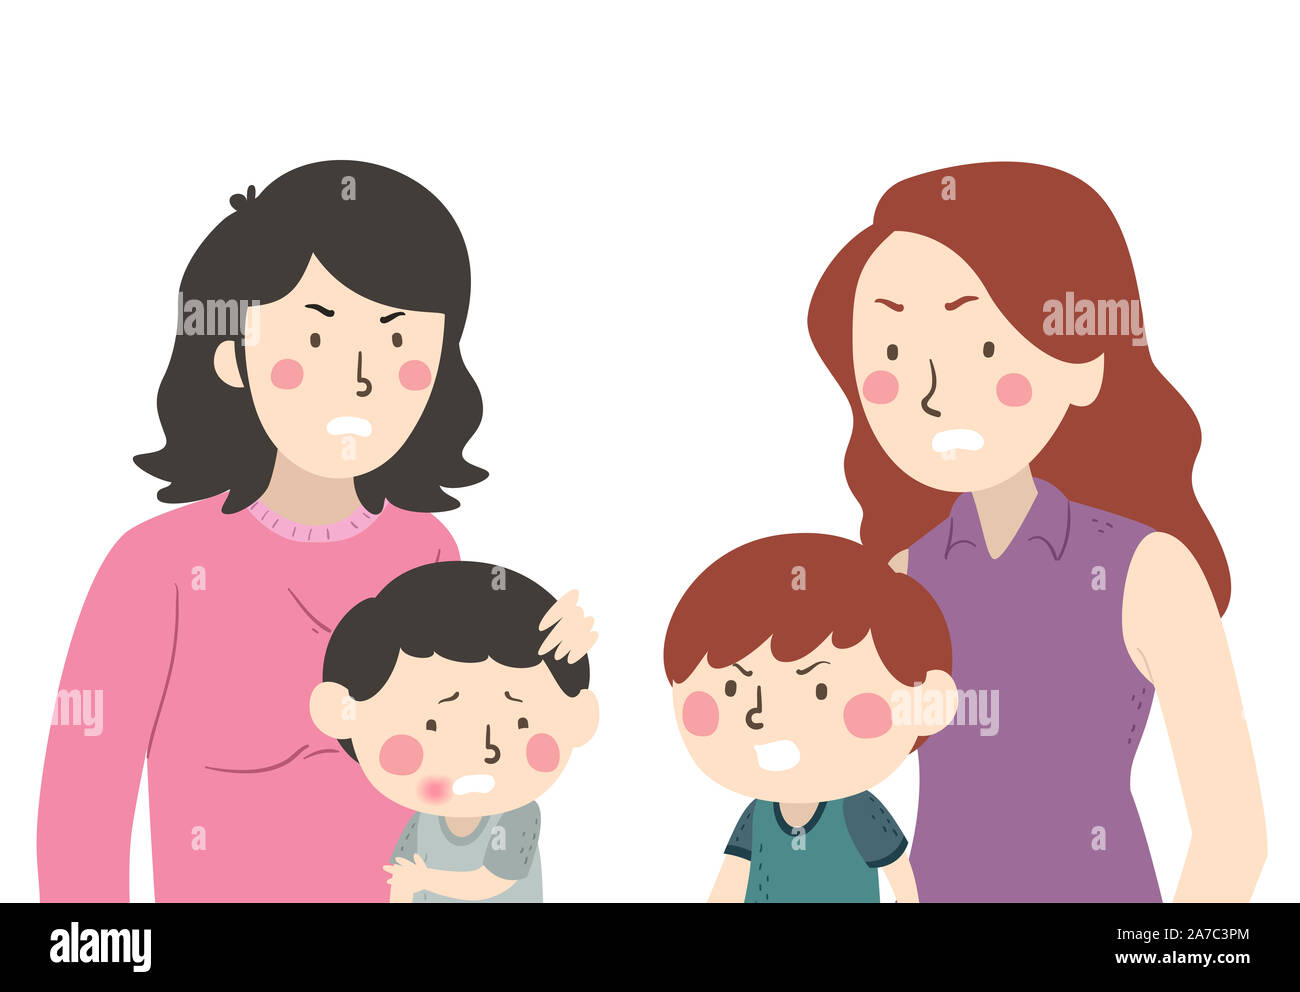 Illustration of Two Kid Boys Fighting with their Mother Stock Photo